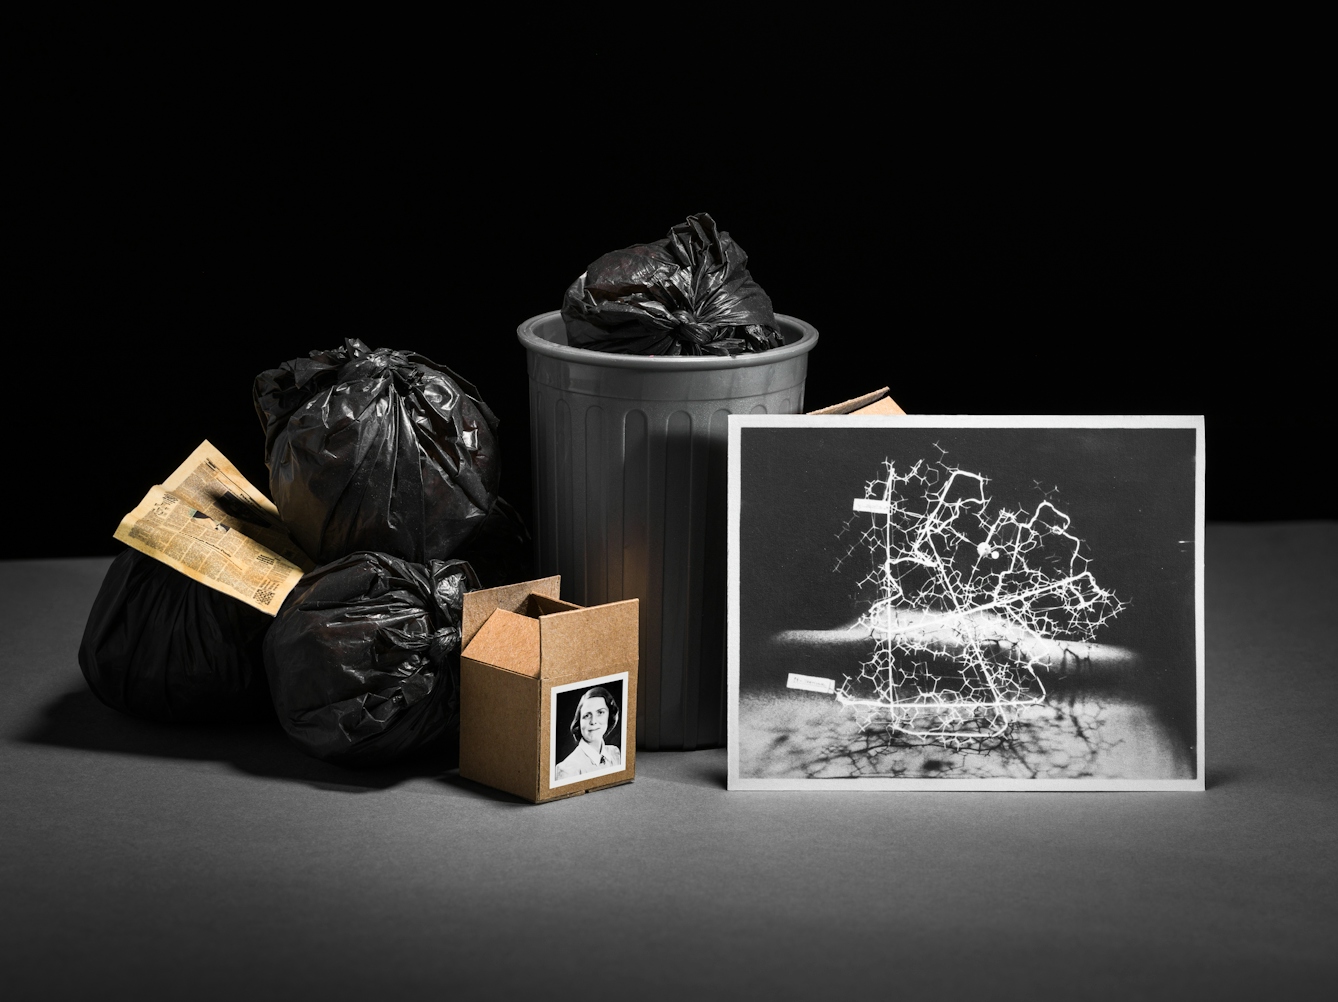 Photograph of a set-built scene made up of a grey card horizontal base against a black vertical background. In the centre of the image is a grey dustbin containing black bin bags. Surrounding the bin are more black bags and brown cardboard boxes. Leaning against one of the cardboard boxes is a black and white photographic print of a protein model.